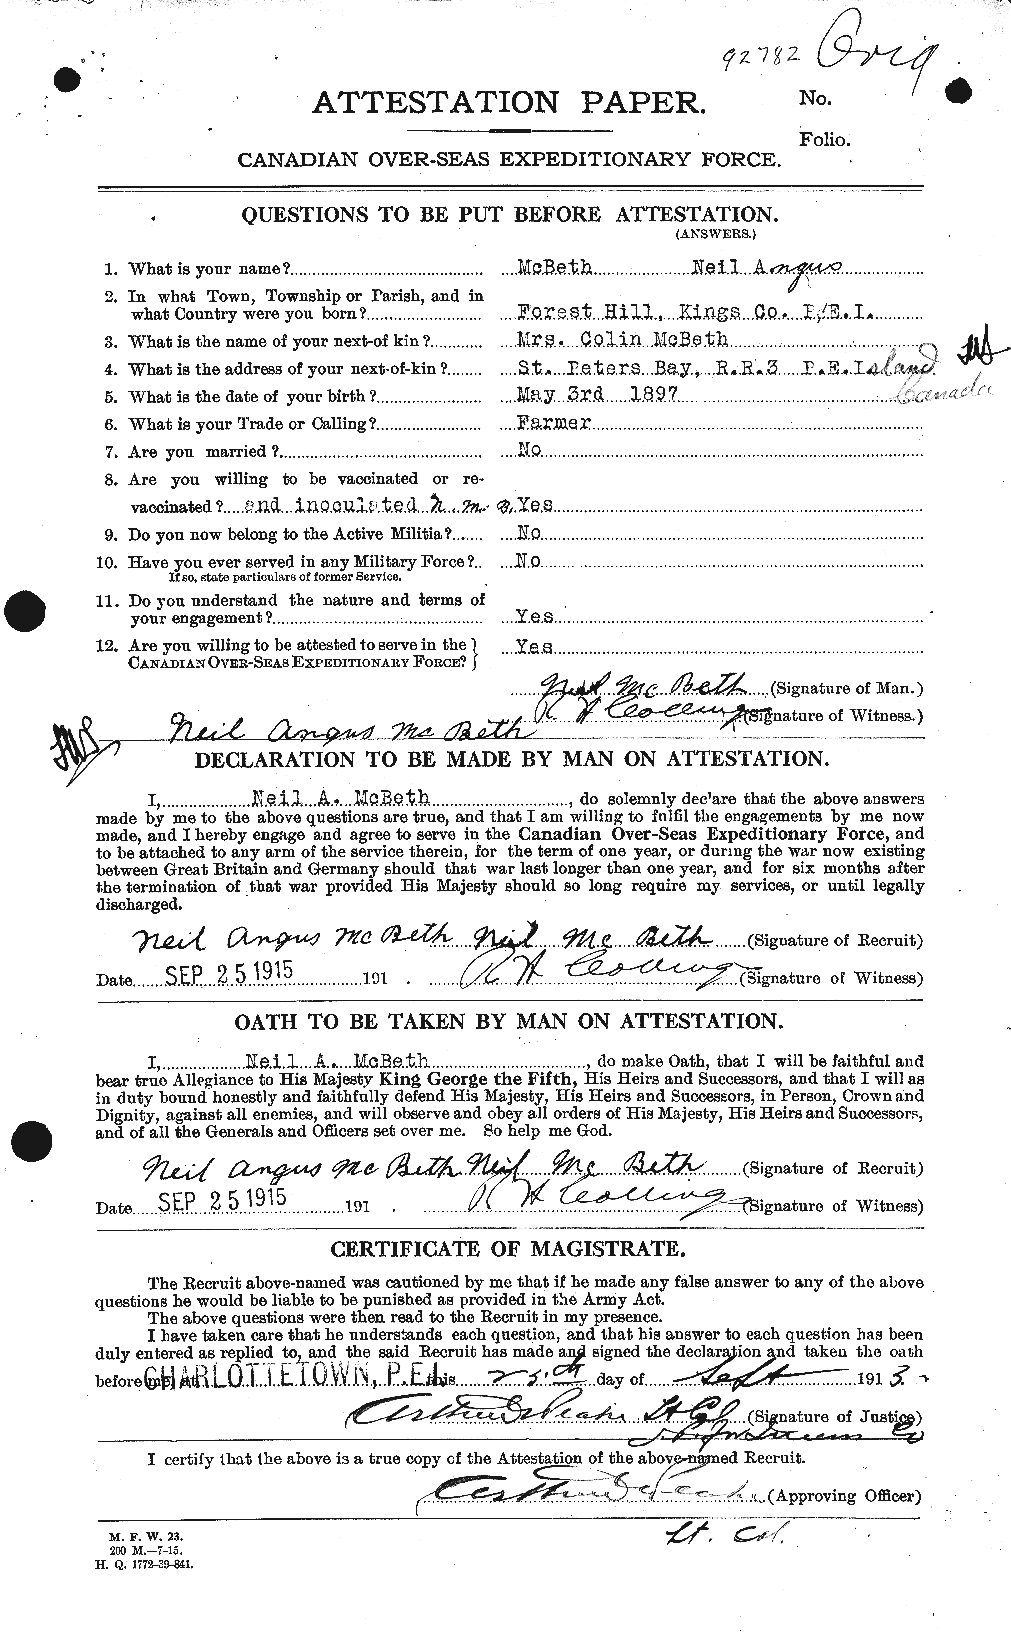 Personnel Records of the First World War - CEF 132106a